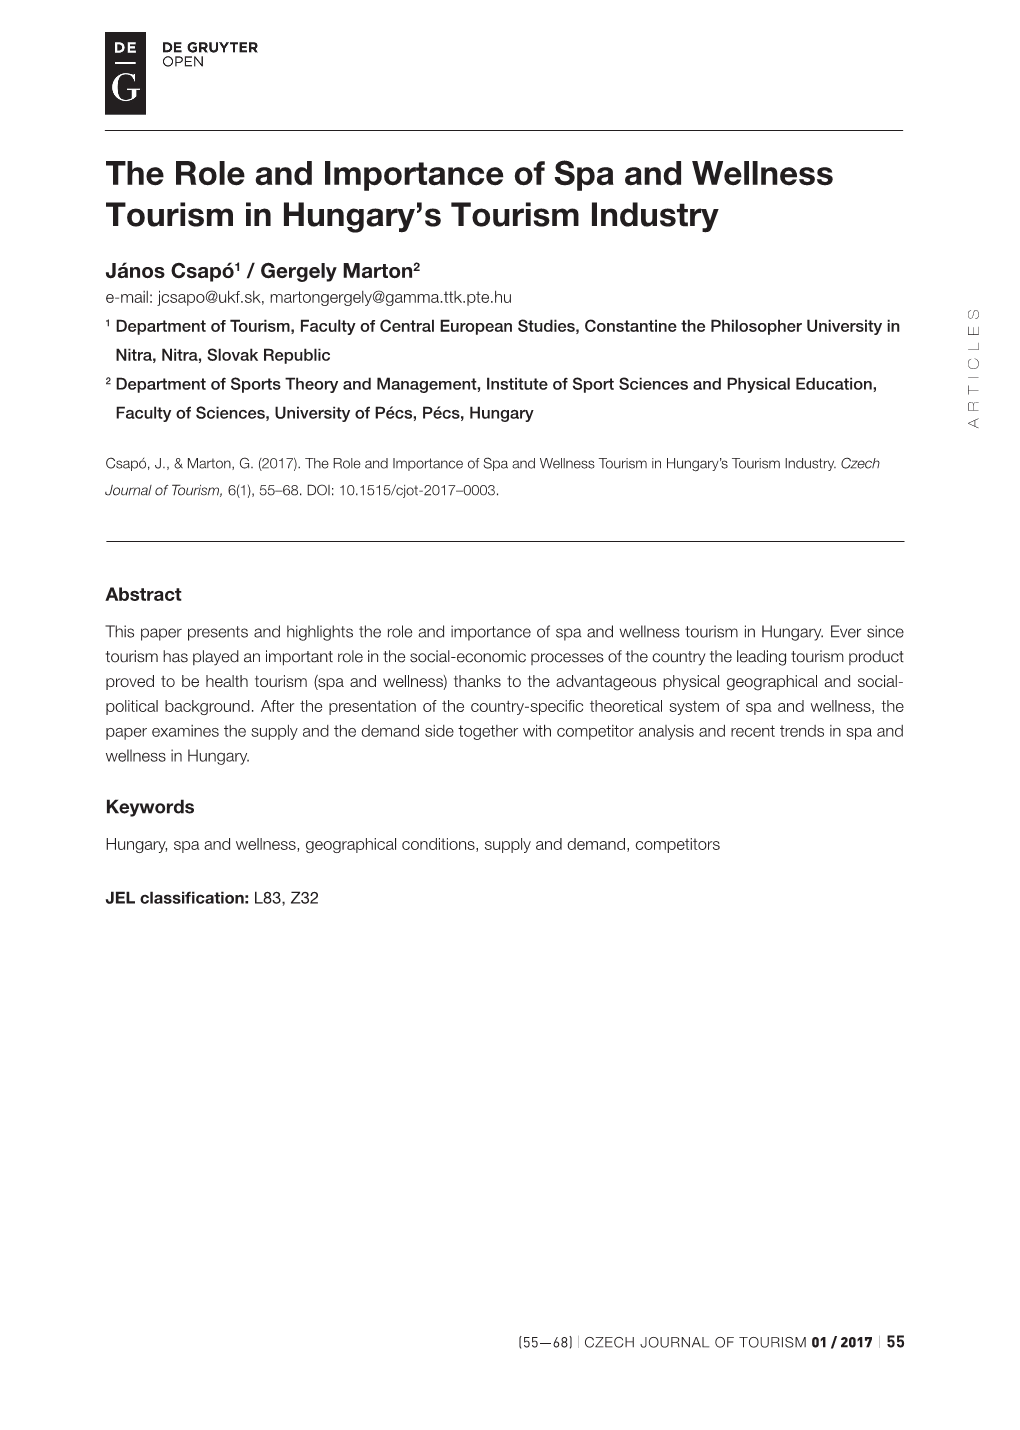 The Role and Importance of Spa and Wellness Tourism in Hungary's